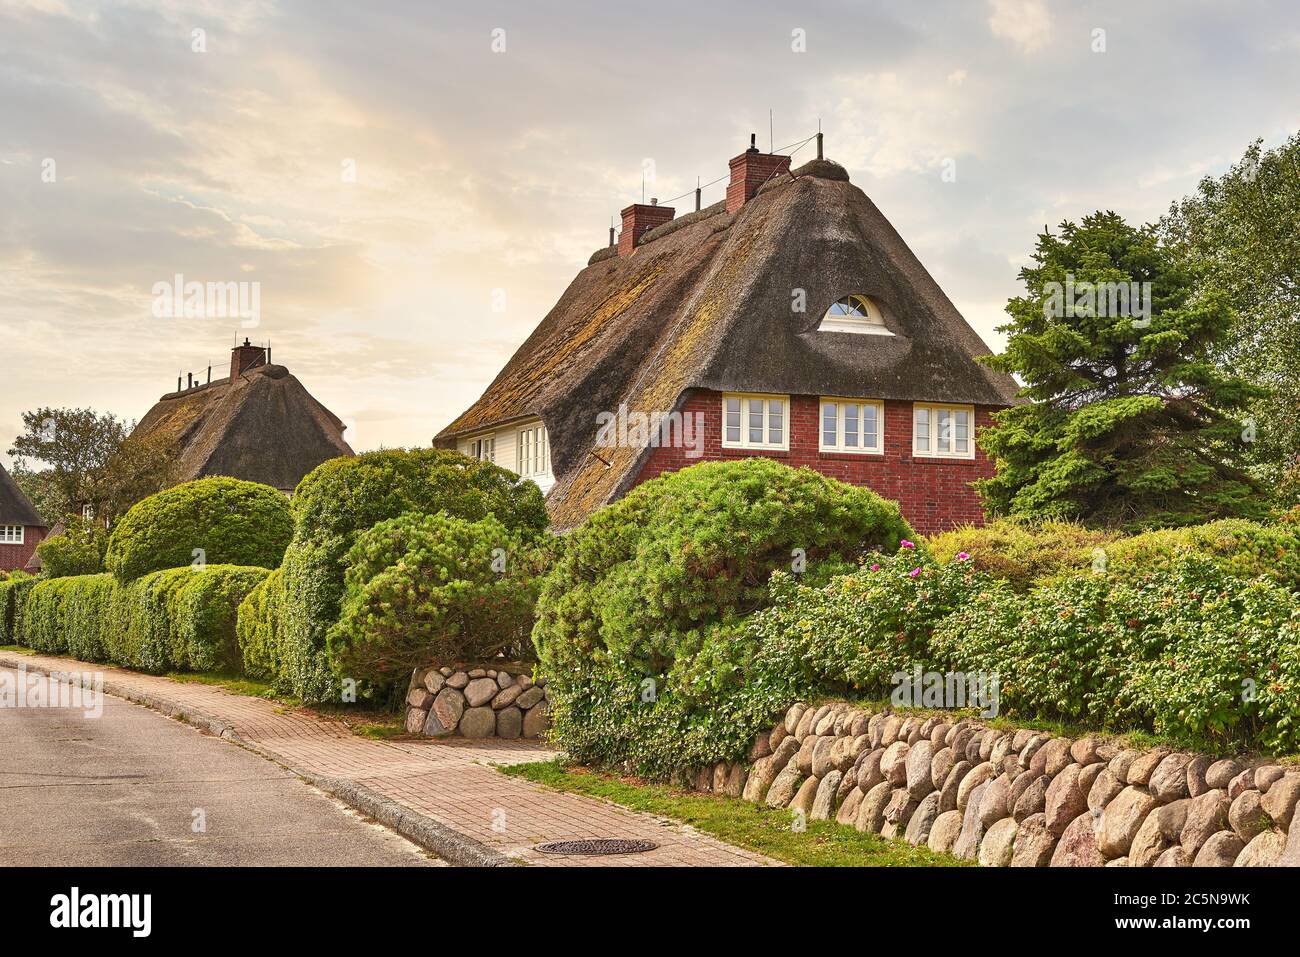 Country house, romantic thatched cottage. Fairytale landscape on the island of Sylt, North Frisian Islands, Germany. Stock Photo